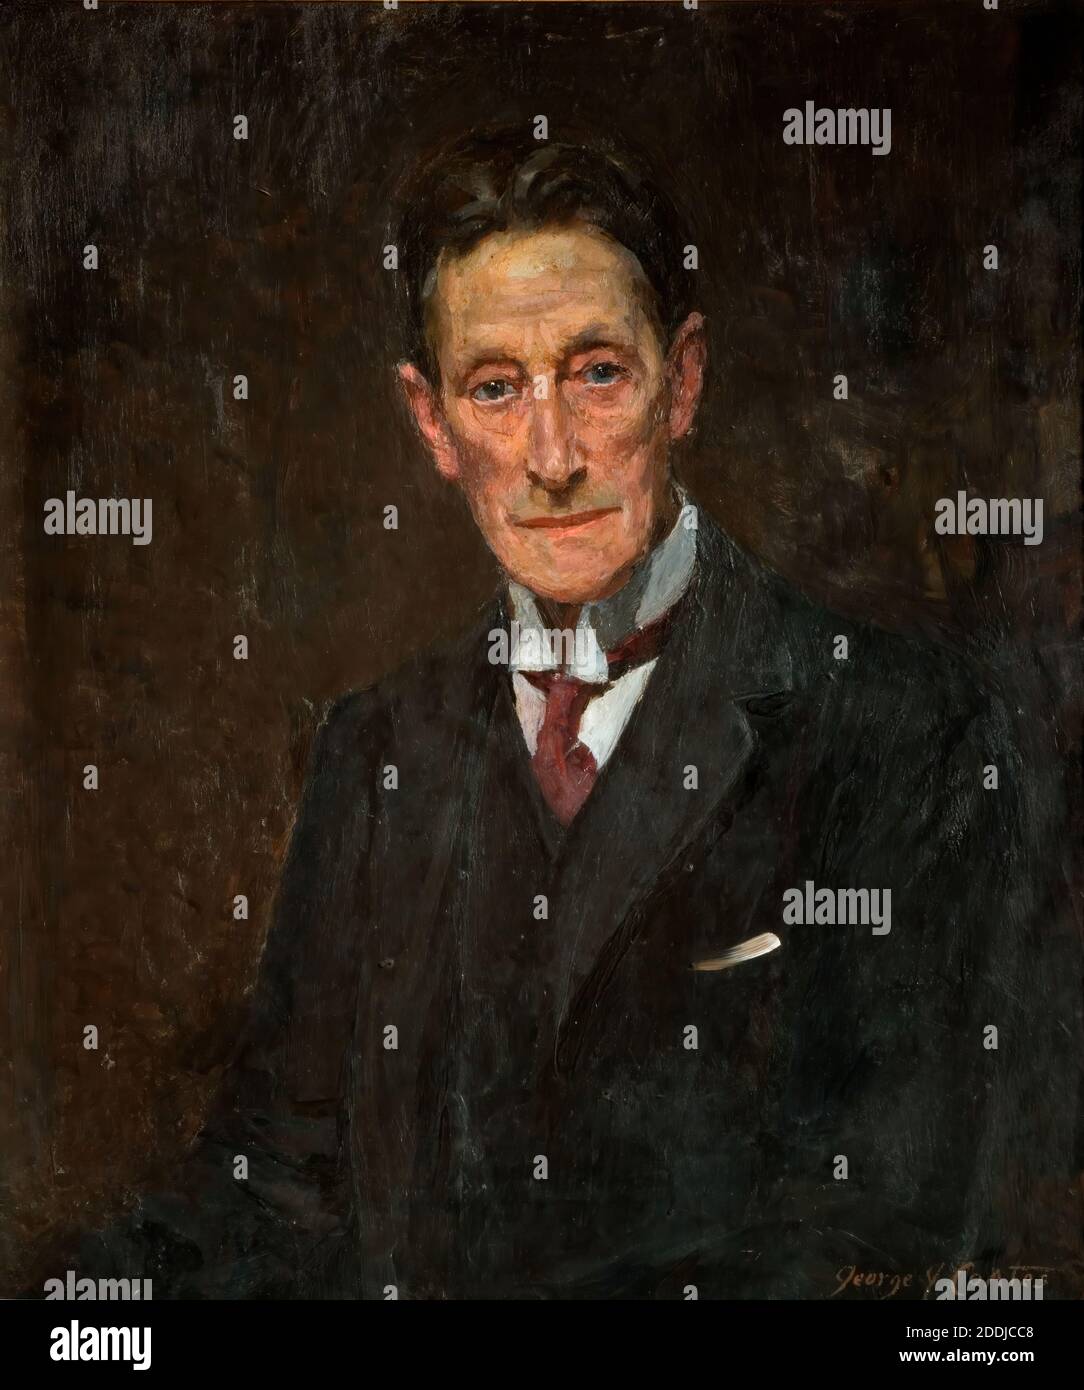 Portrait of Sir Johnston Forbes-Robertson, 1900-1925 George James Coates (d. 1930), Sir Johnston Forbes-Robertson was an actor and theatre manager, Oil Painting, Portrait, Chiaroscuro, Male, Actor, Theatre, Performer Stock Photo